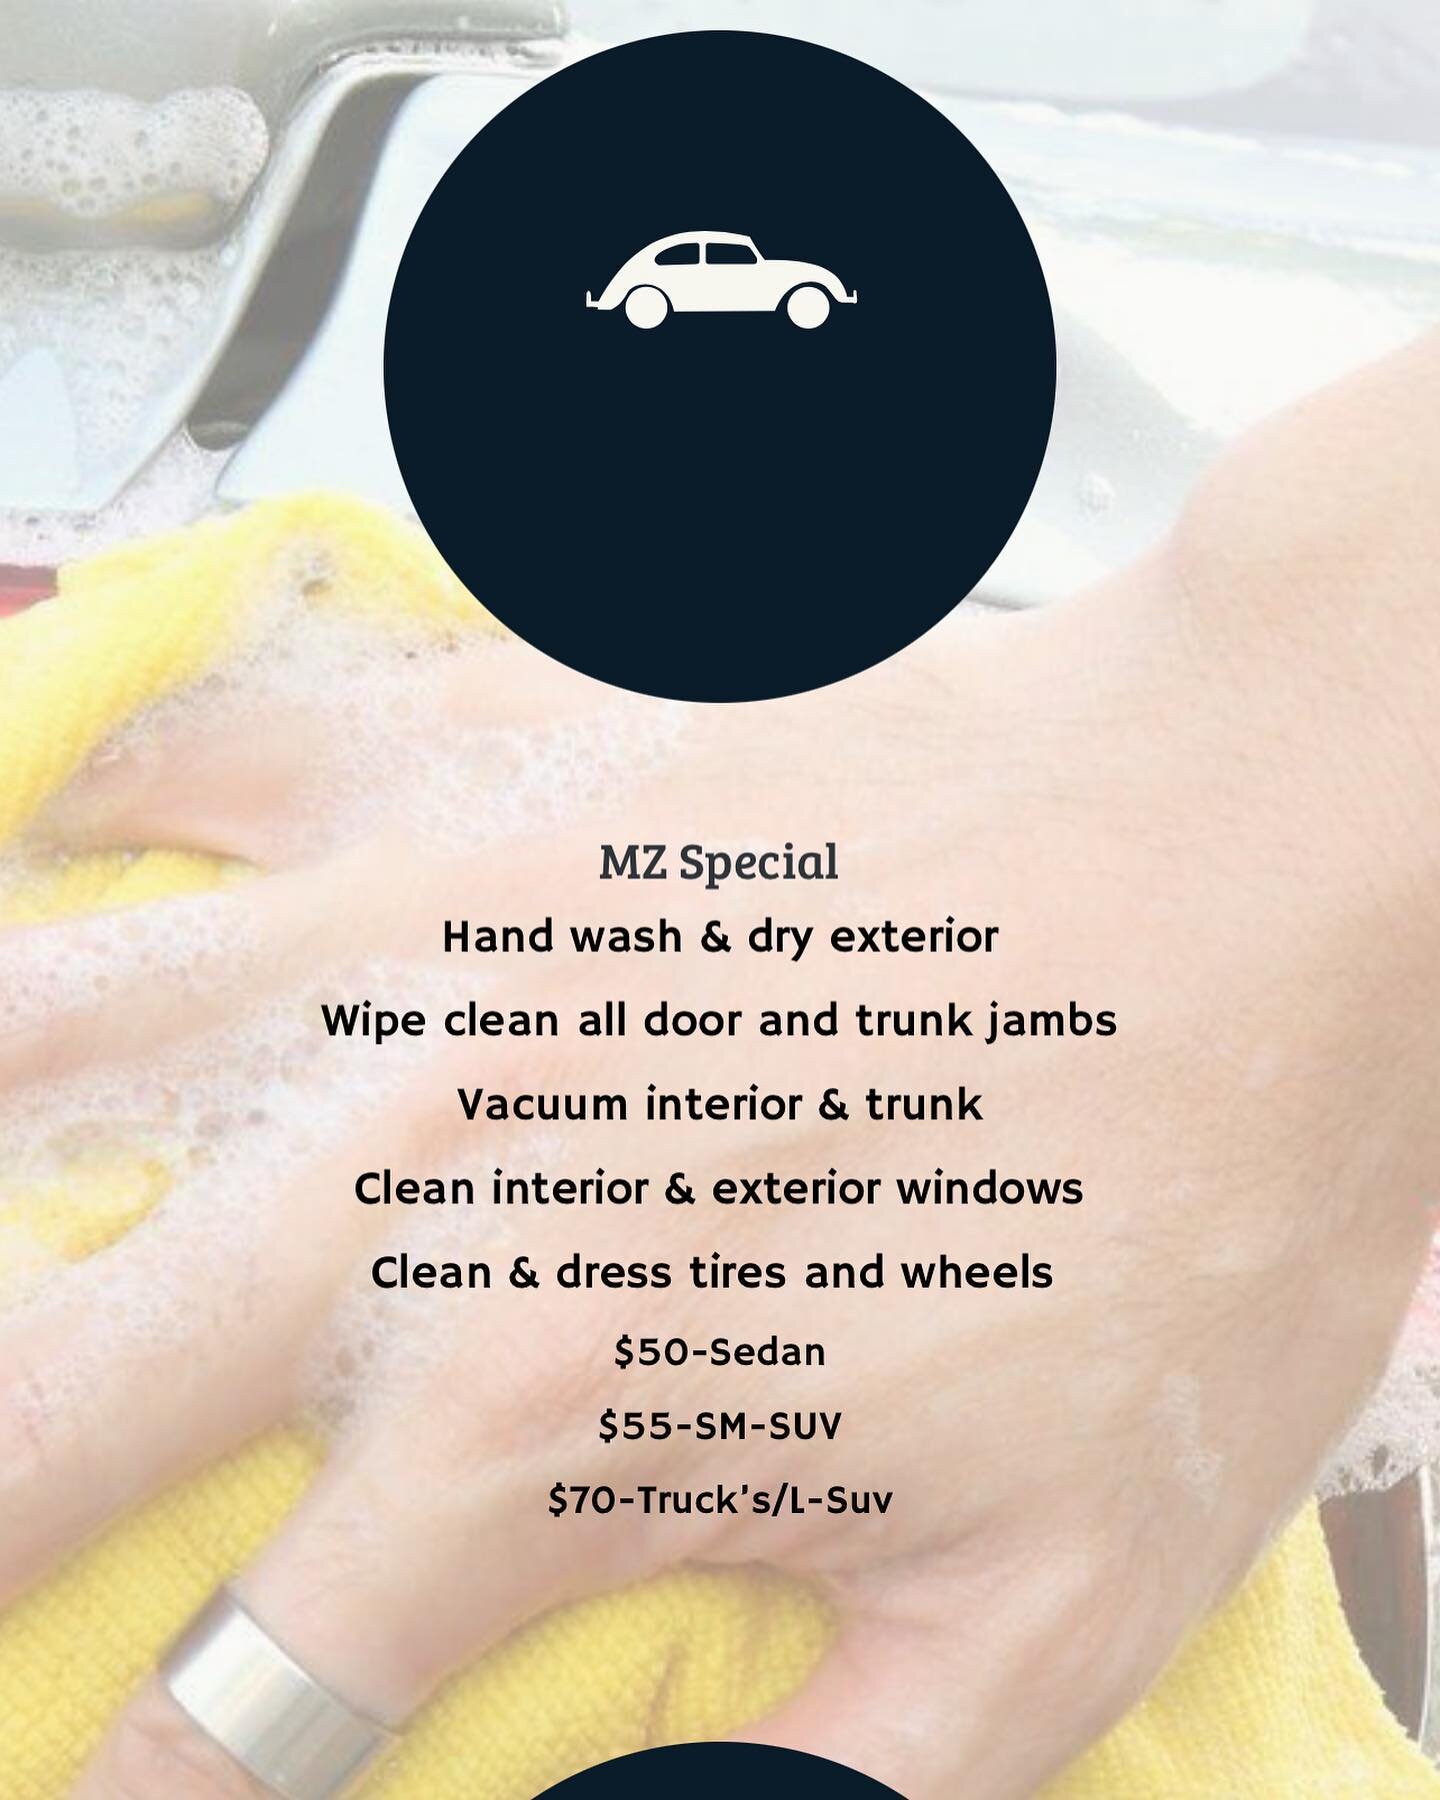 Mzmobile Autodetail

after all the snow, ice, rain.  your car needs love, 😍 that's why it Mz Autodetail puts a 15% discount on these services!

call us send us a text message or an email for any question or appointment!

This offer starts January 17